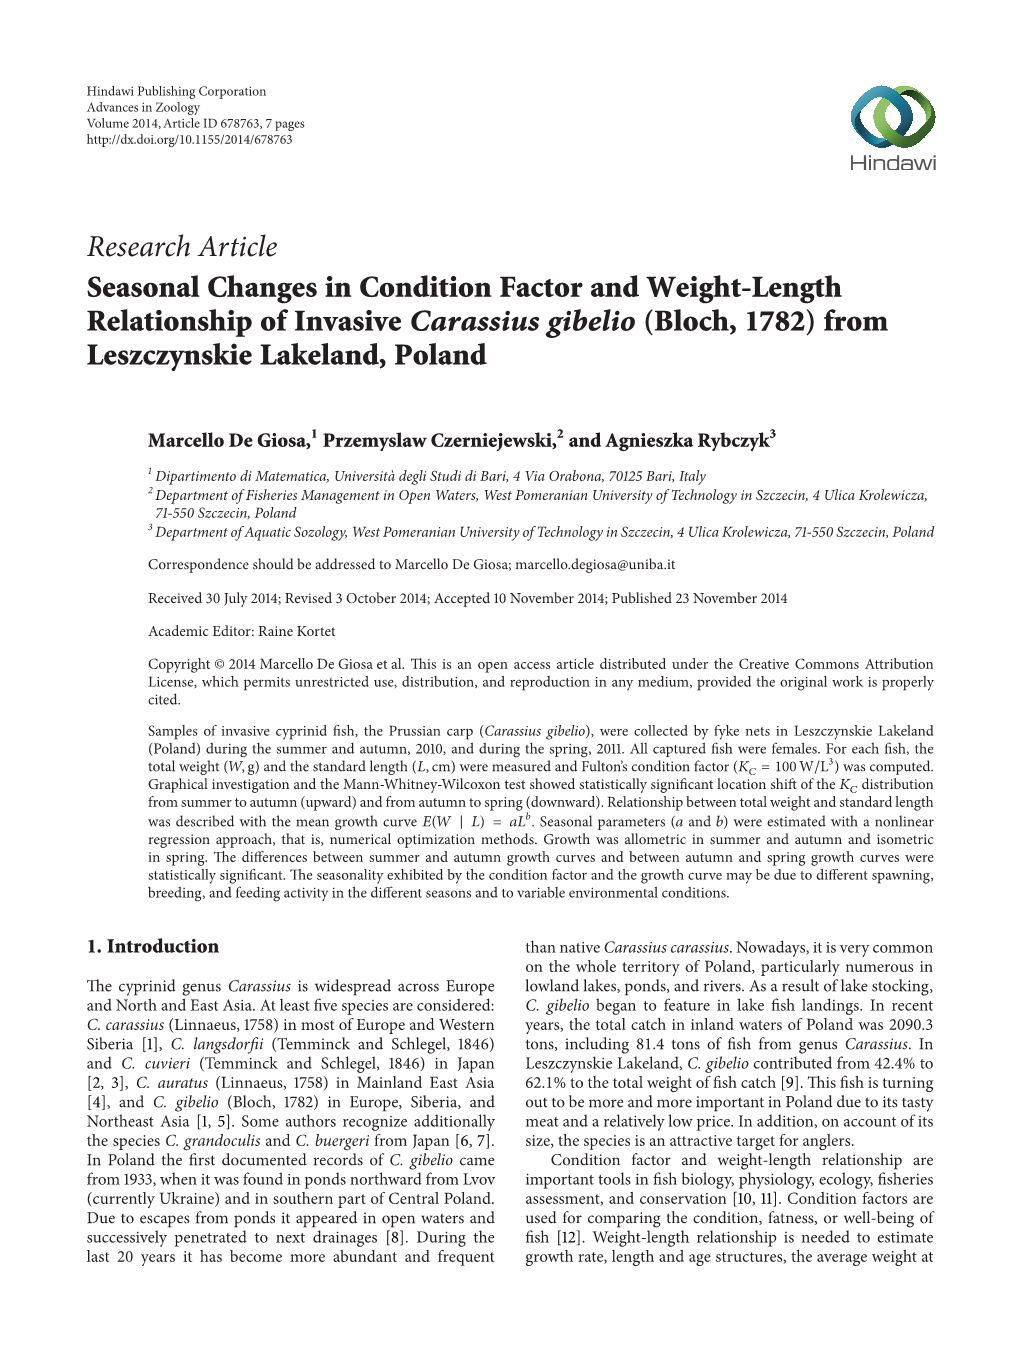 Research Article Seasonal Changes in Condition Factor and Weight-Length Relationship of Invasive Carassius Gibelio (Bloch, 1782) from Leszczynskie Lakeland, Poland